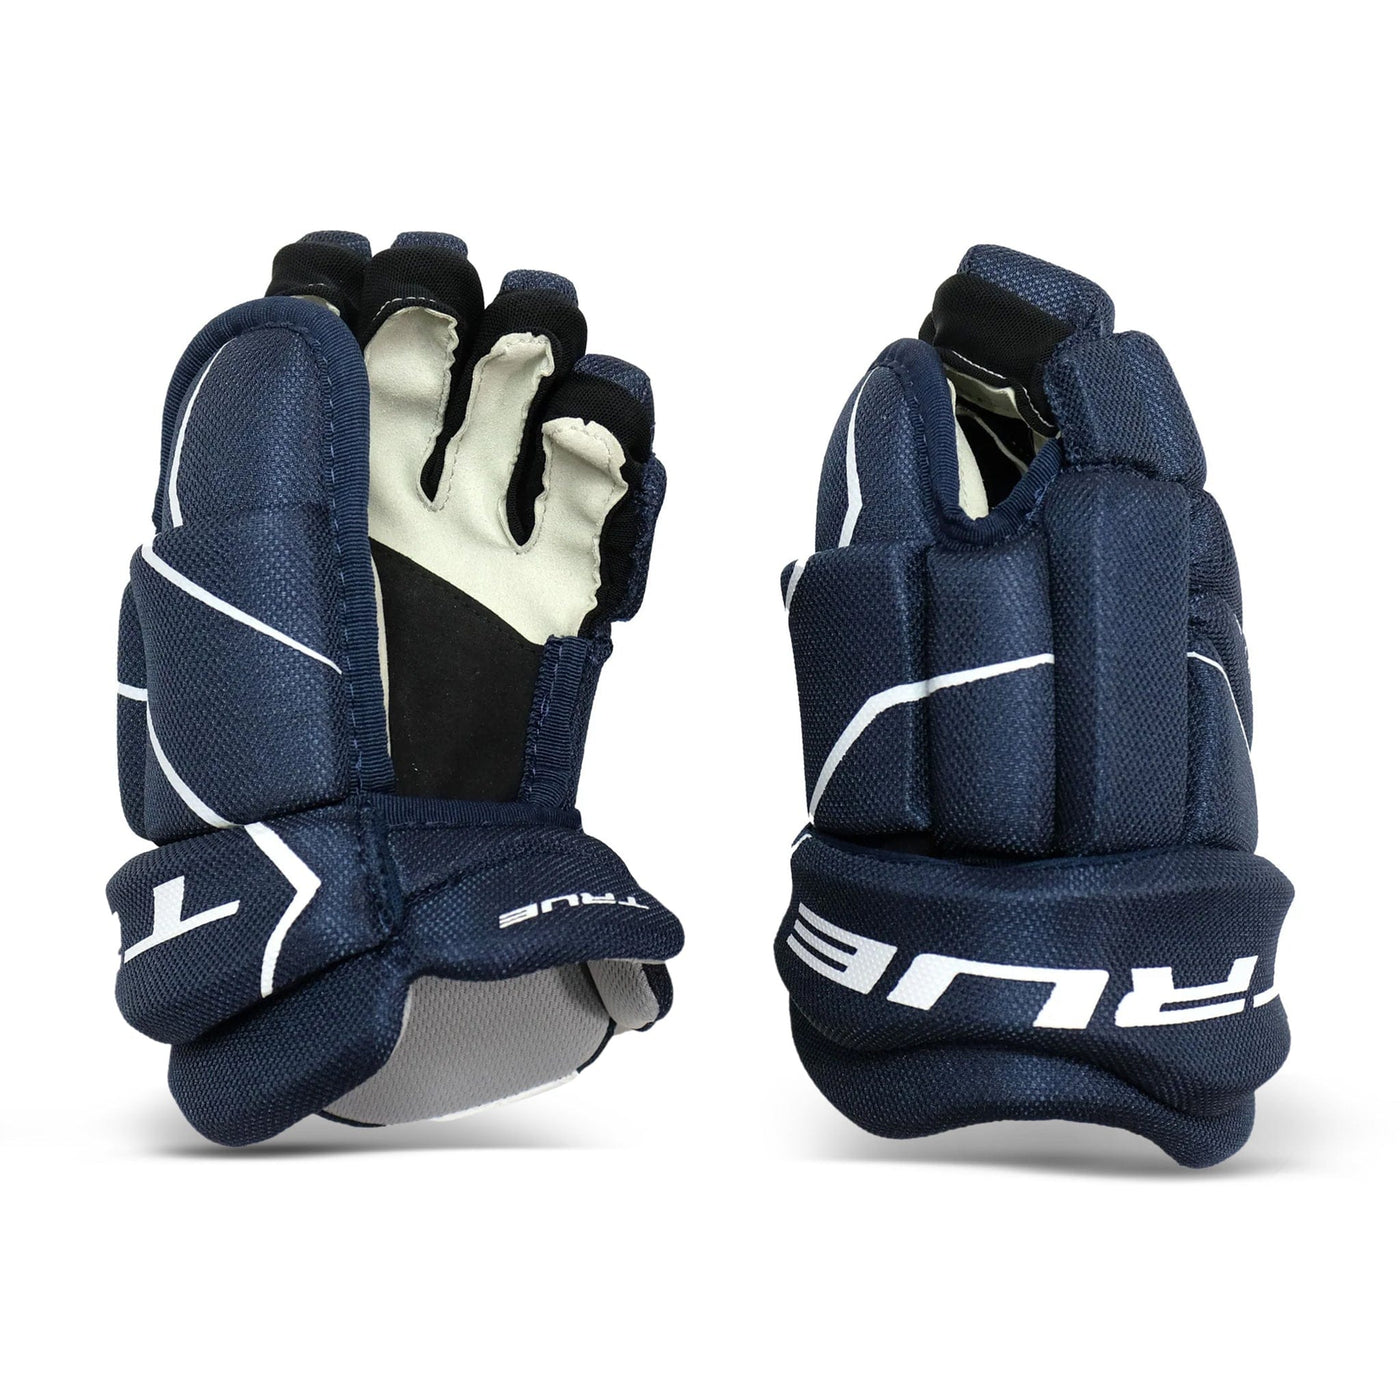 TRUE Catalyst 9X Youth Hockey Gloves - The Hockey Shop Source For Sports